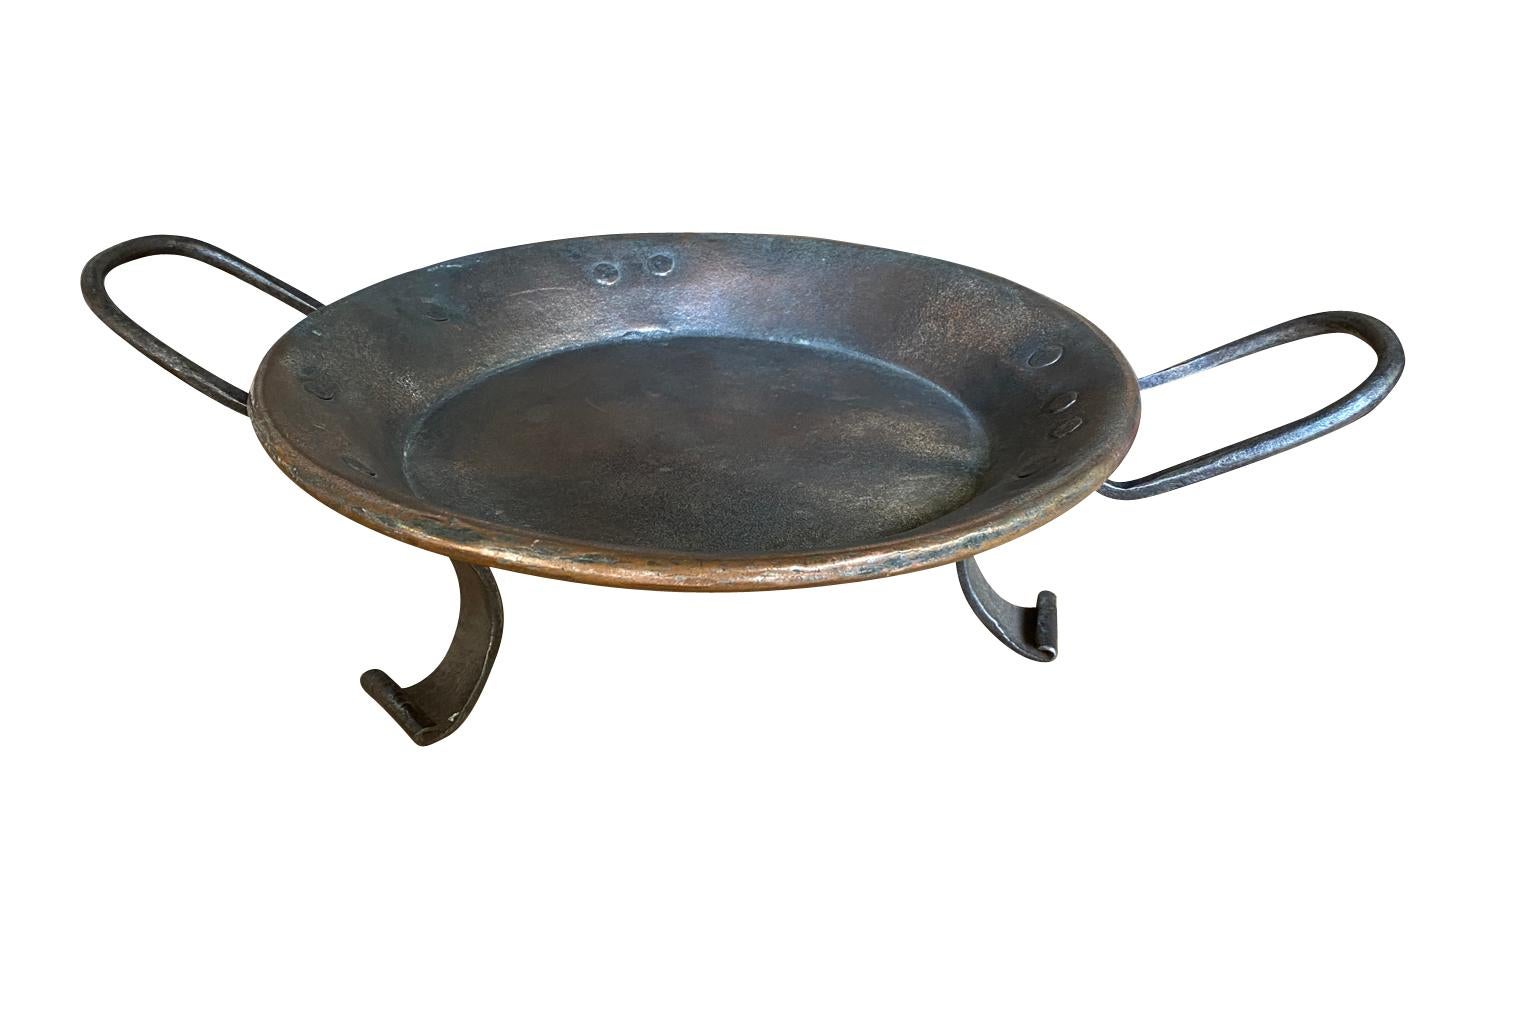 A very charming 18th century Copper Pan from the Southwest of France.  Beautifully crafted from heavy gauge copper raised on feet and with handles.  A perfect accessory piece for any table top or kitchen island.